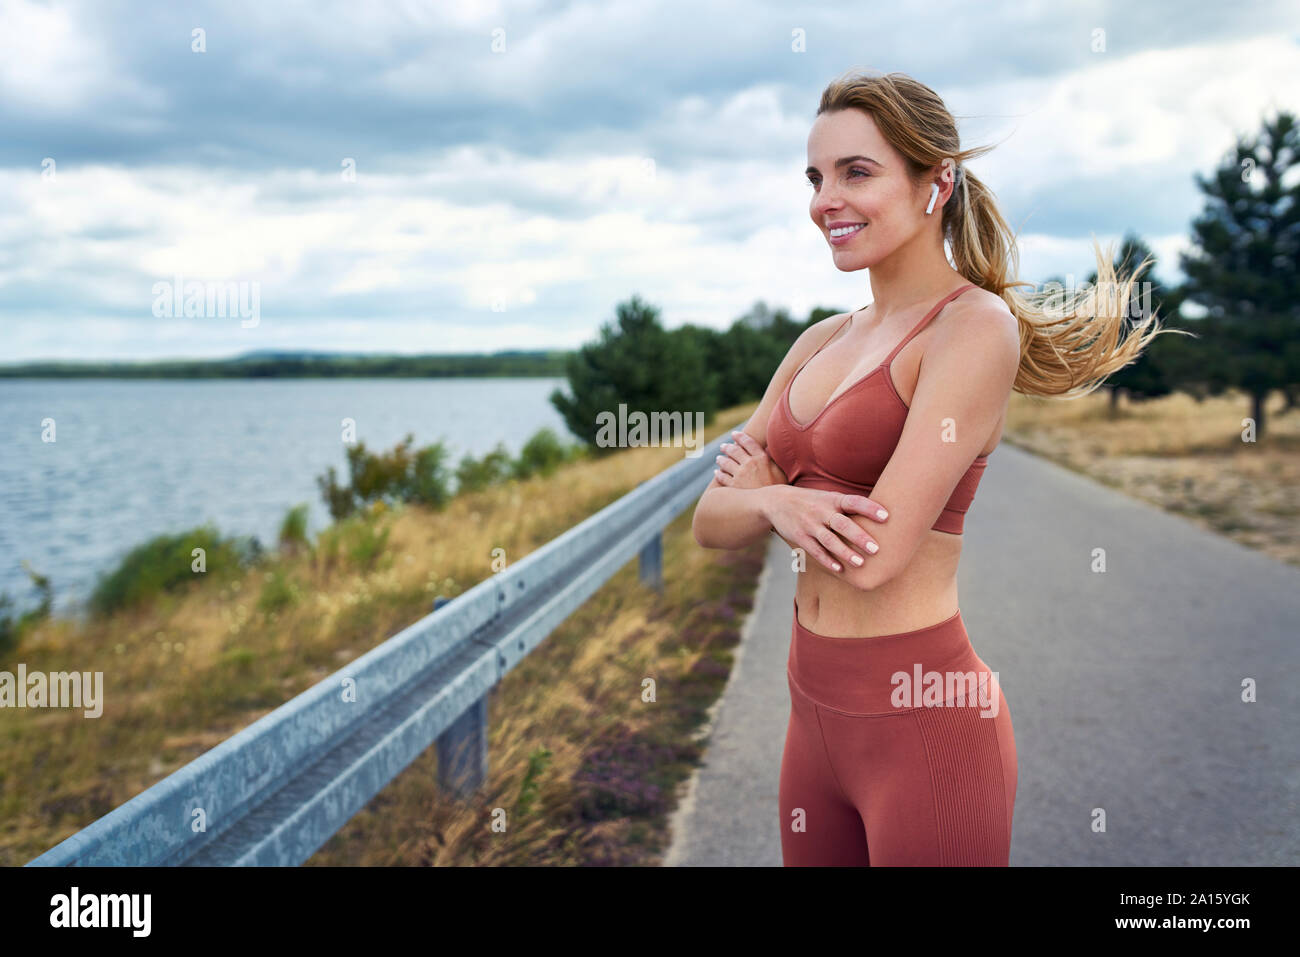 Athletic woman standing outdoors with crossed arms and looking away Stock Photo